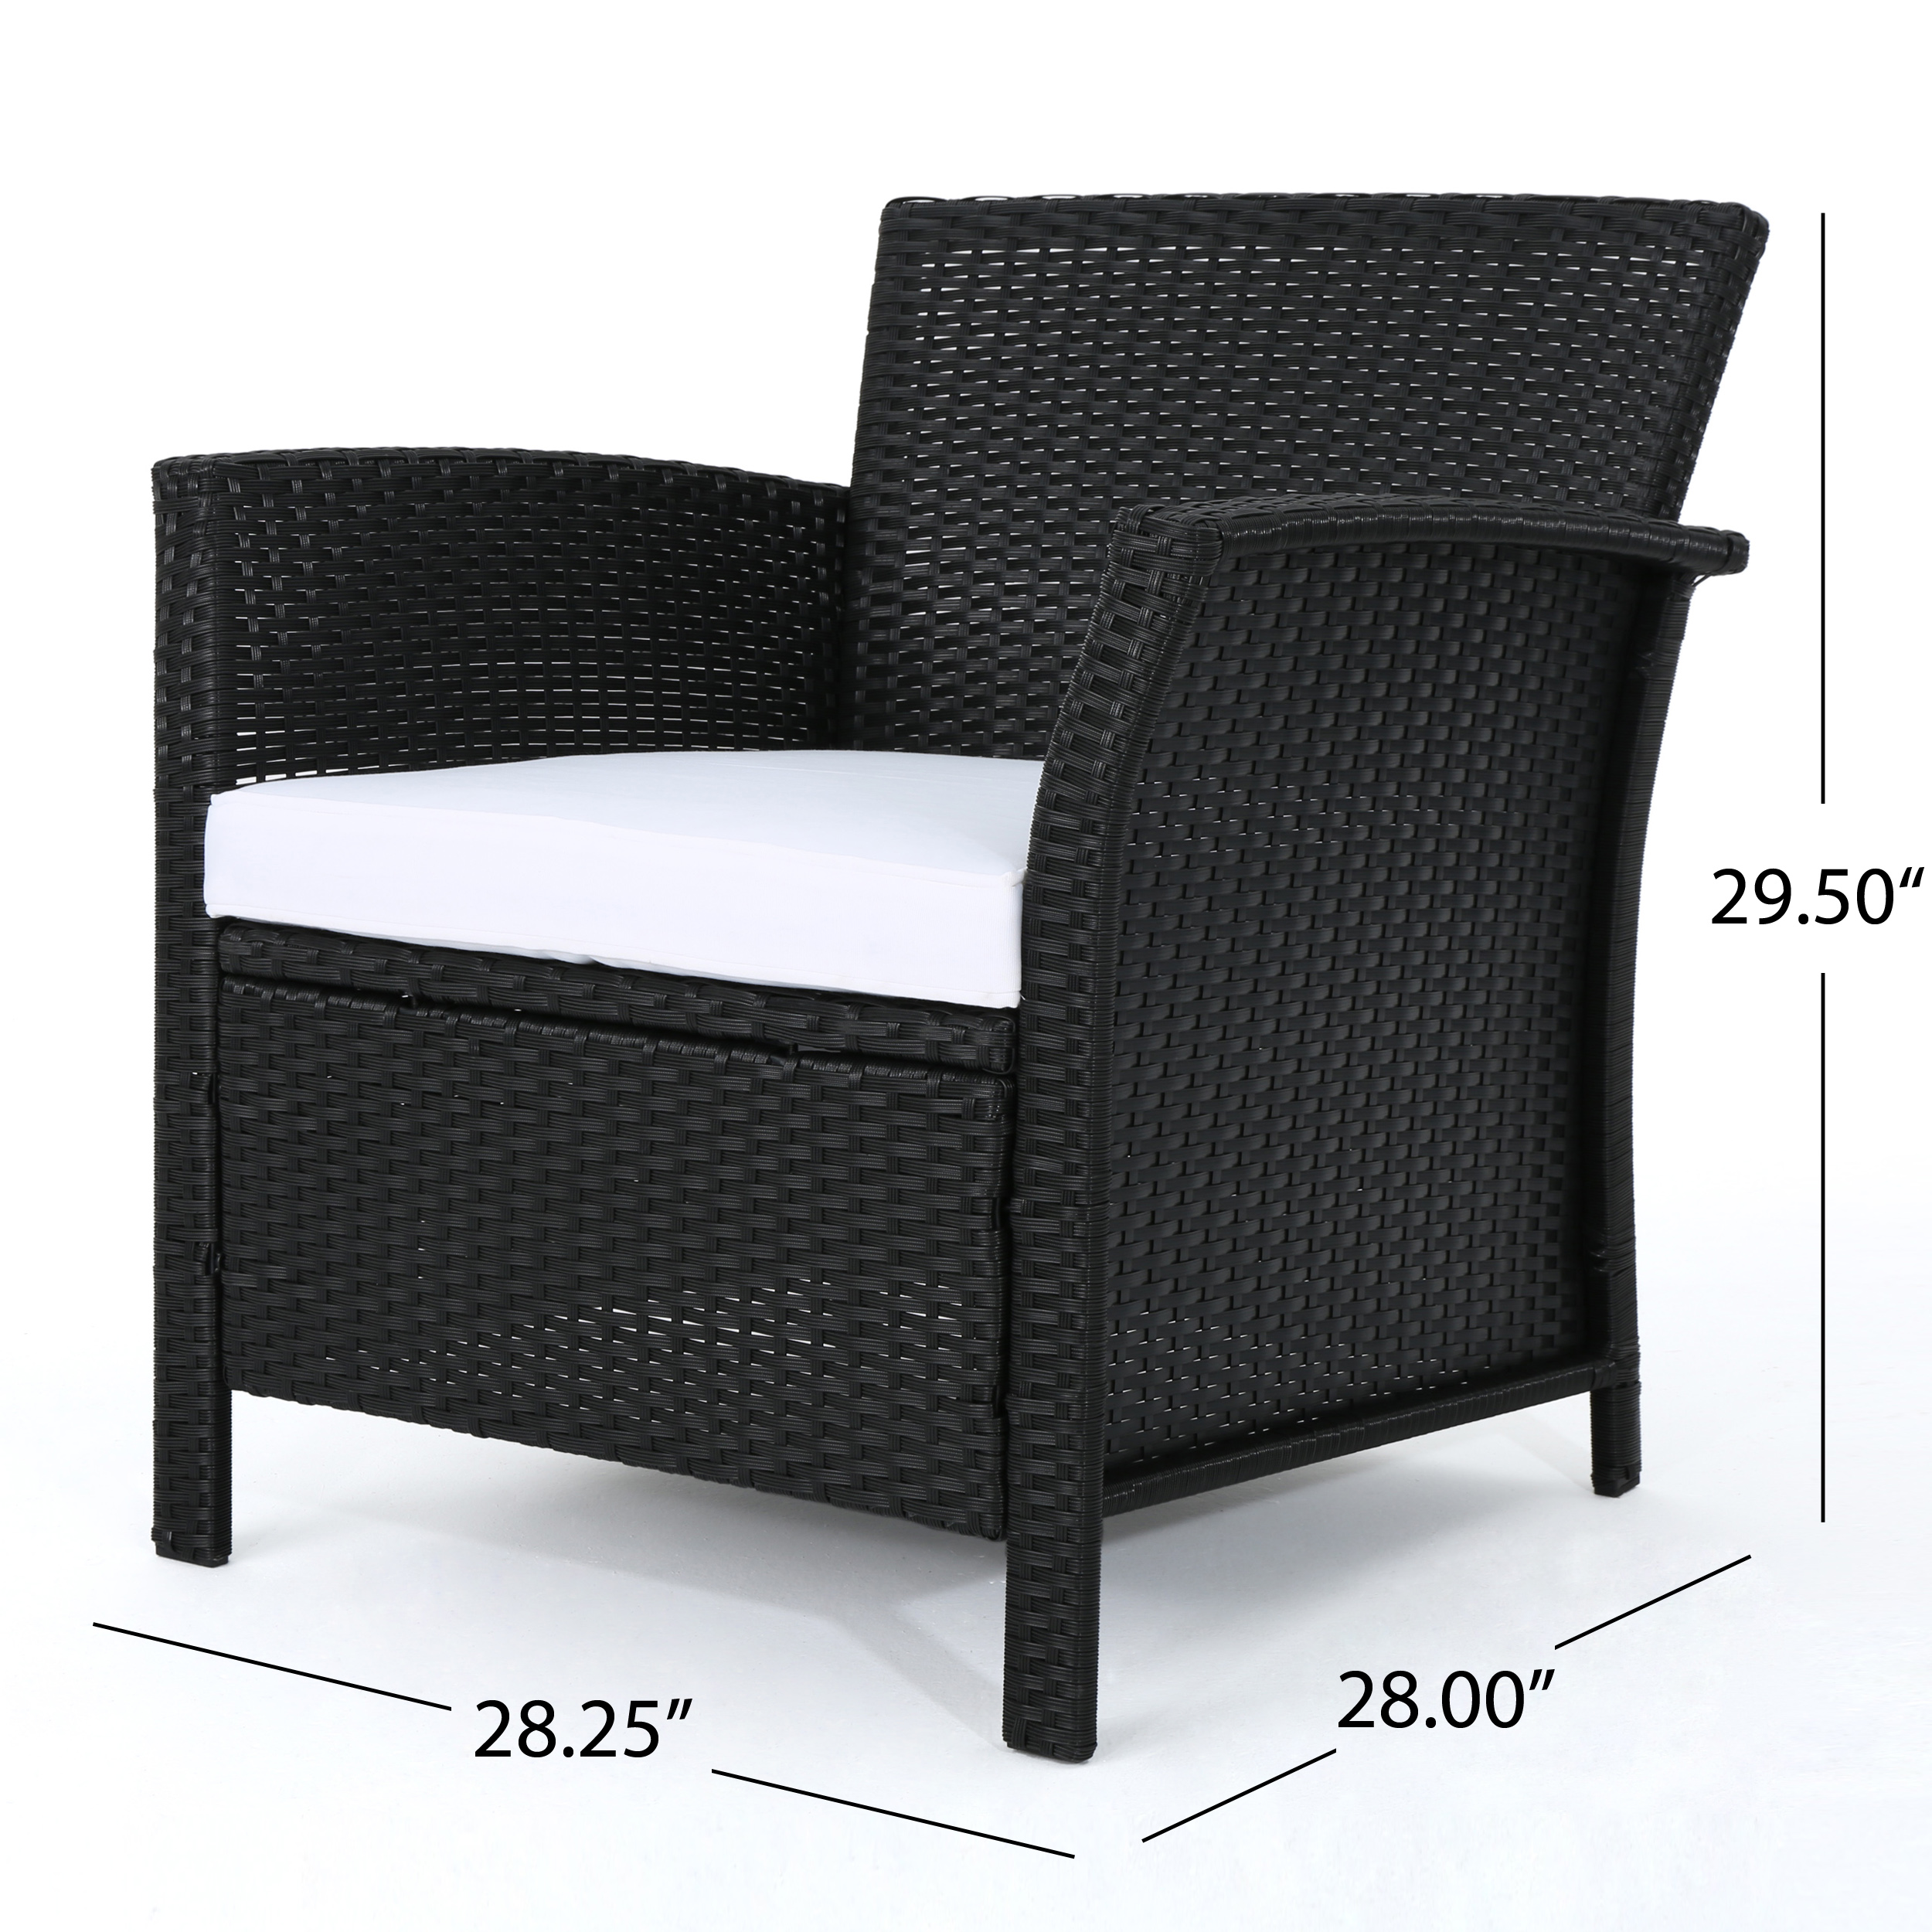 Anton Outdoor 4 Piece Wicker Chat Set with Cushions, Black, White - image 2 of 7